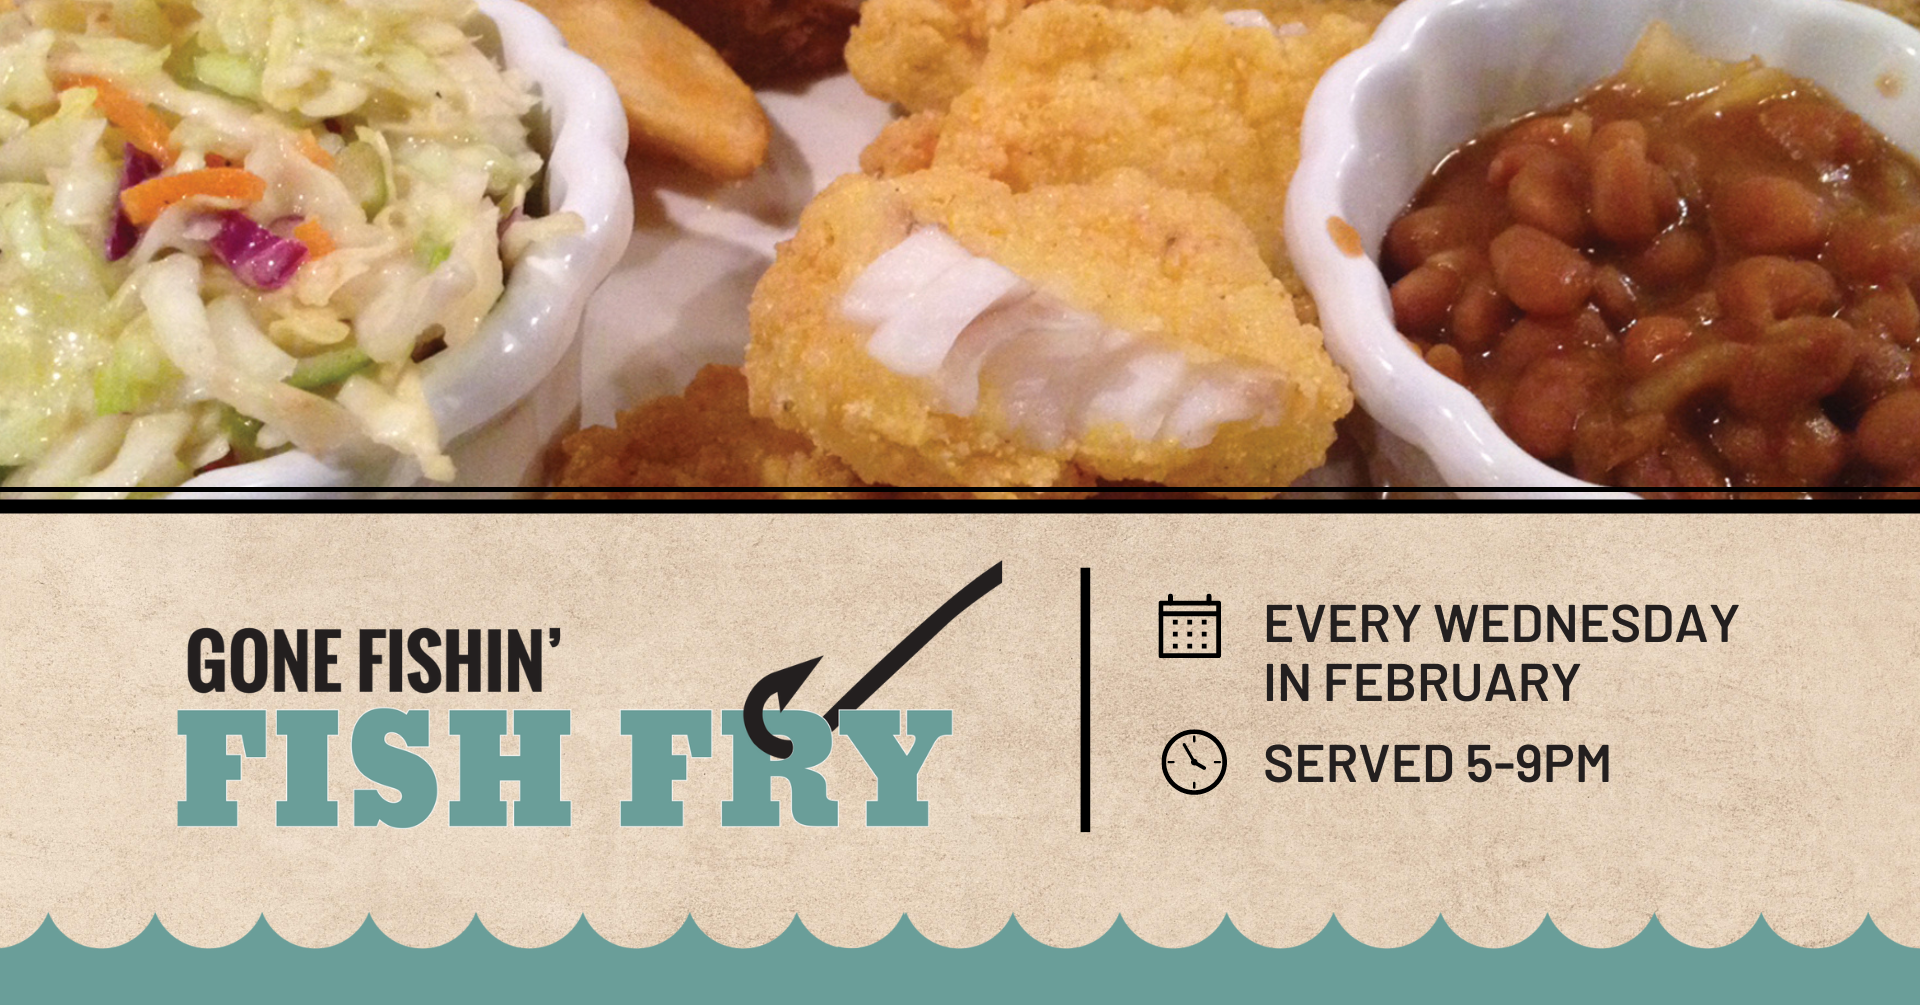 February Fish Fry is back at CooperSmith's in 2023.